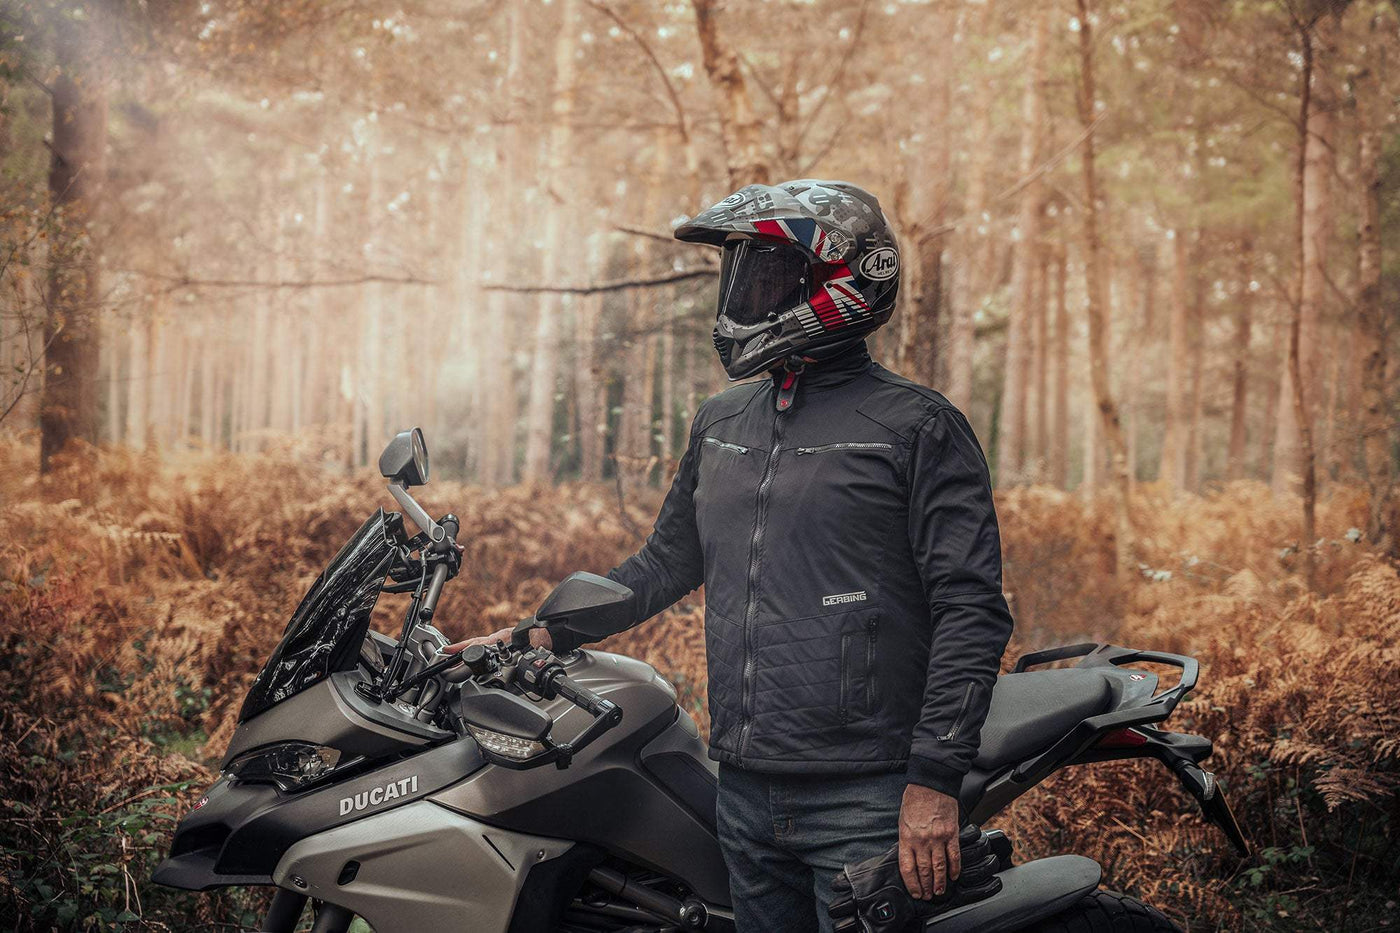 Why Gerbing is the best heated clothing company in the world - Gerbing Heated Motorcycle Clothing